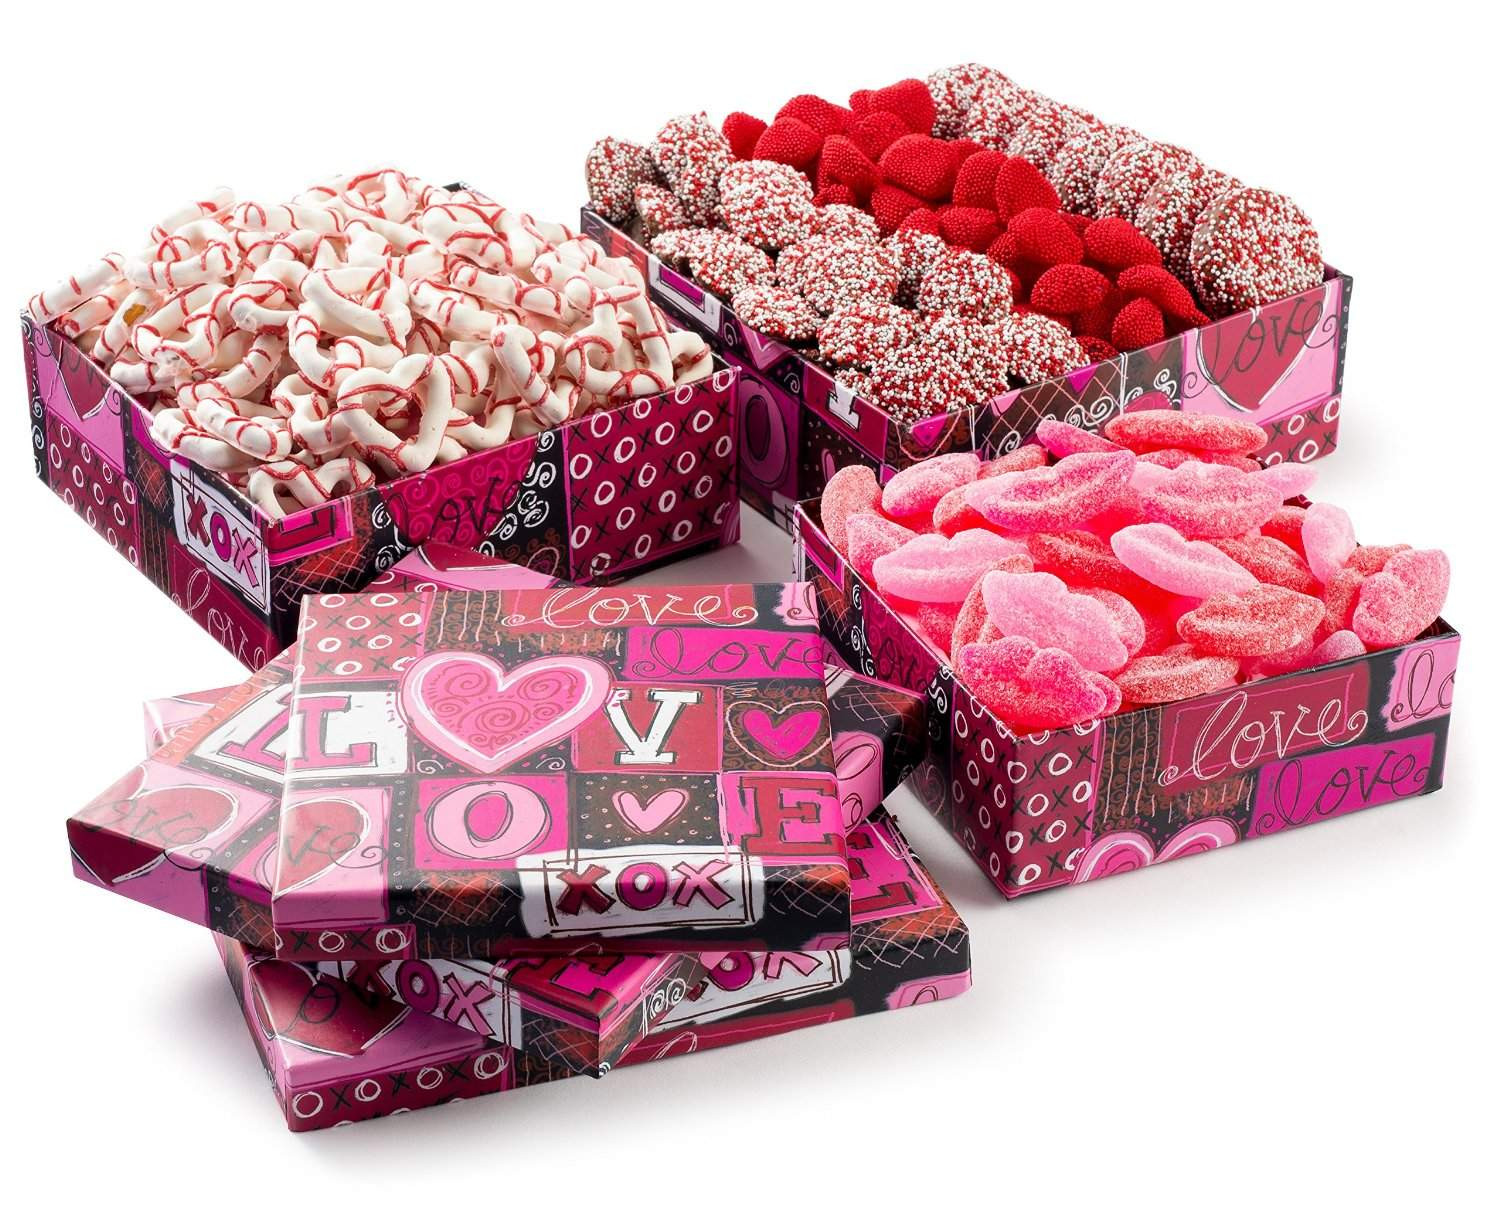 Valentines Day Candy Gift Ideas
 Top 5 Best Valentine’s Day Candy Gift Ideas